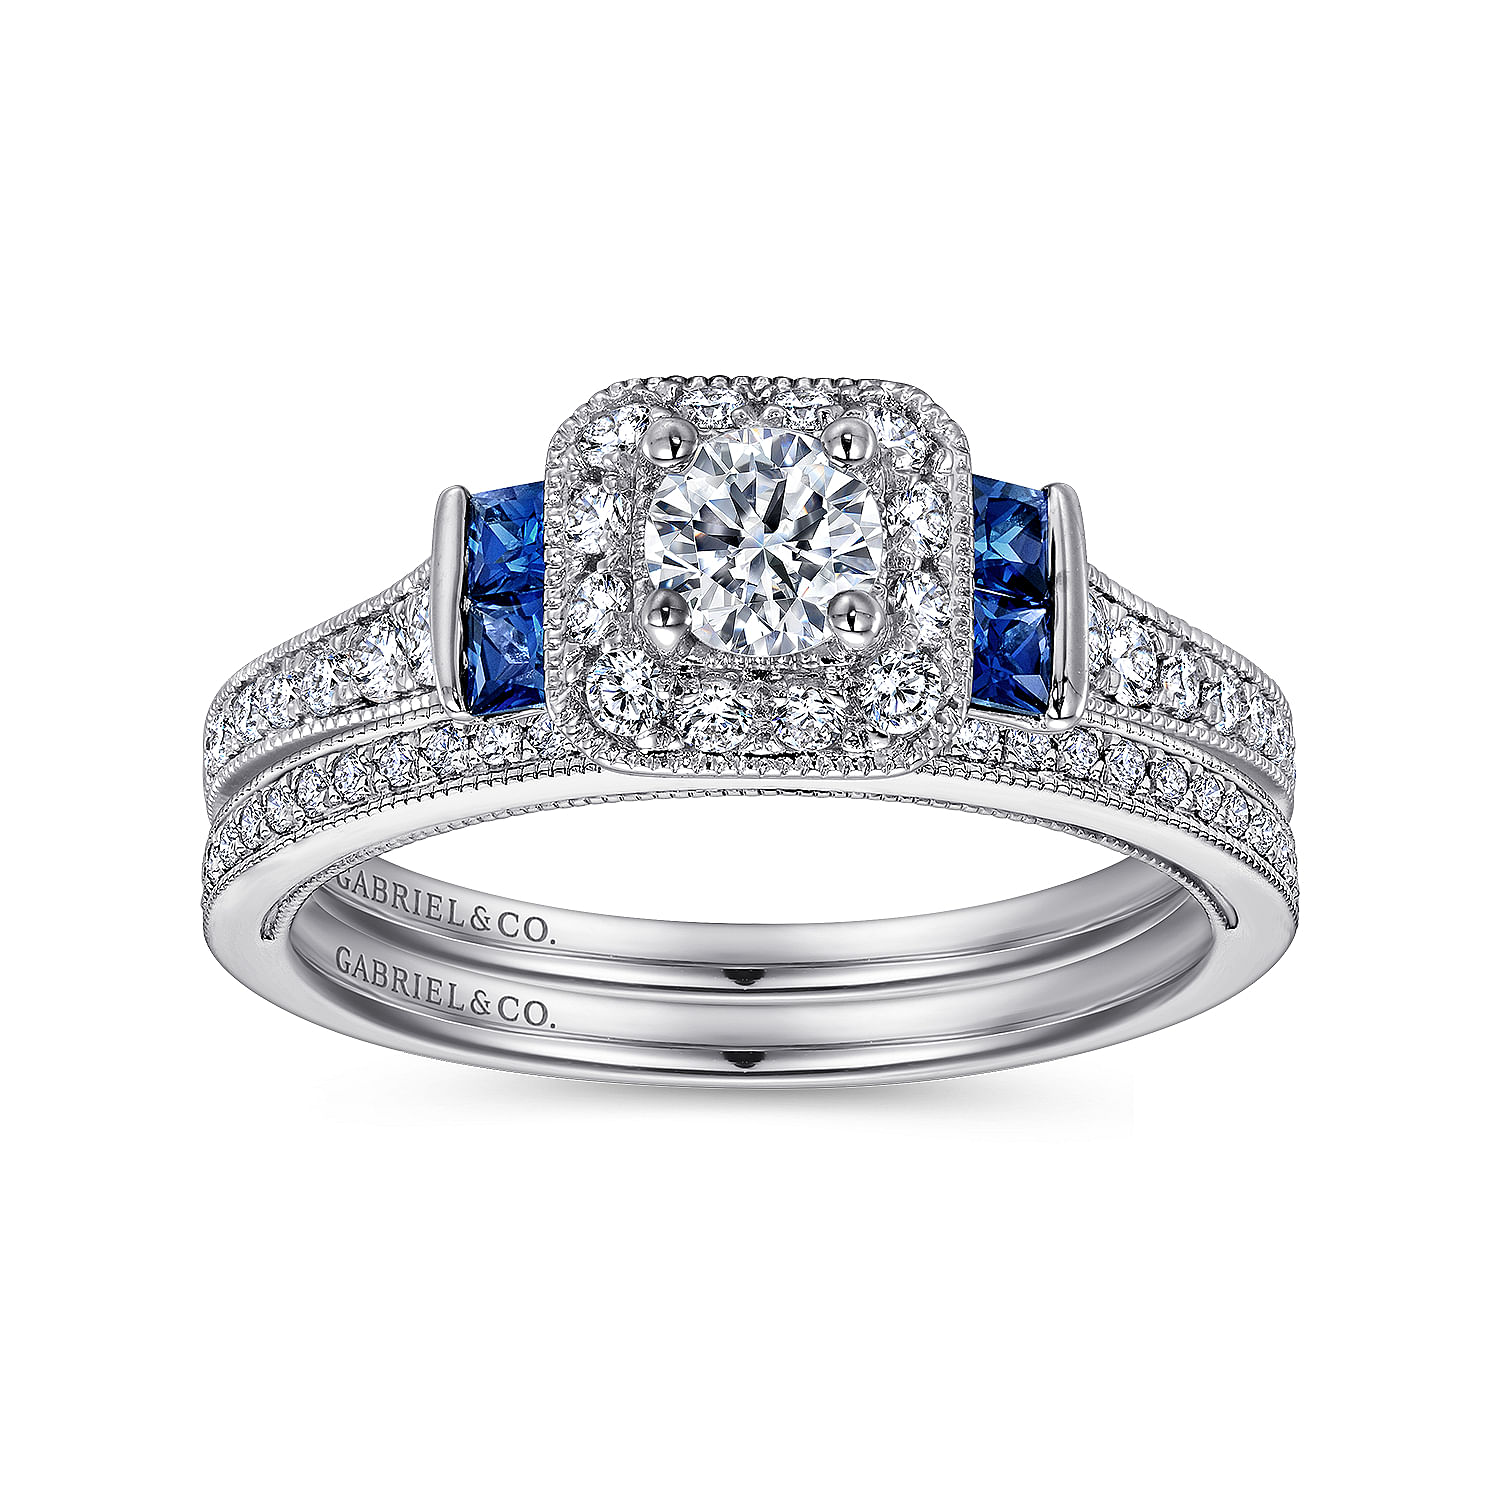 Vintage Inspired 14K White Gold Round Halo Sapphire and Diamond Complete Engagement Ring